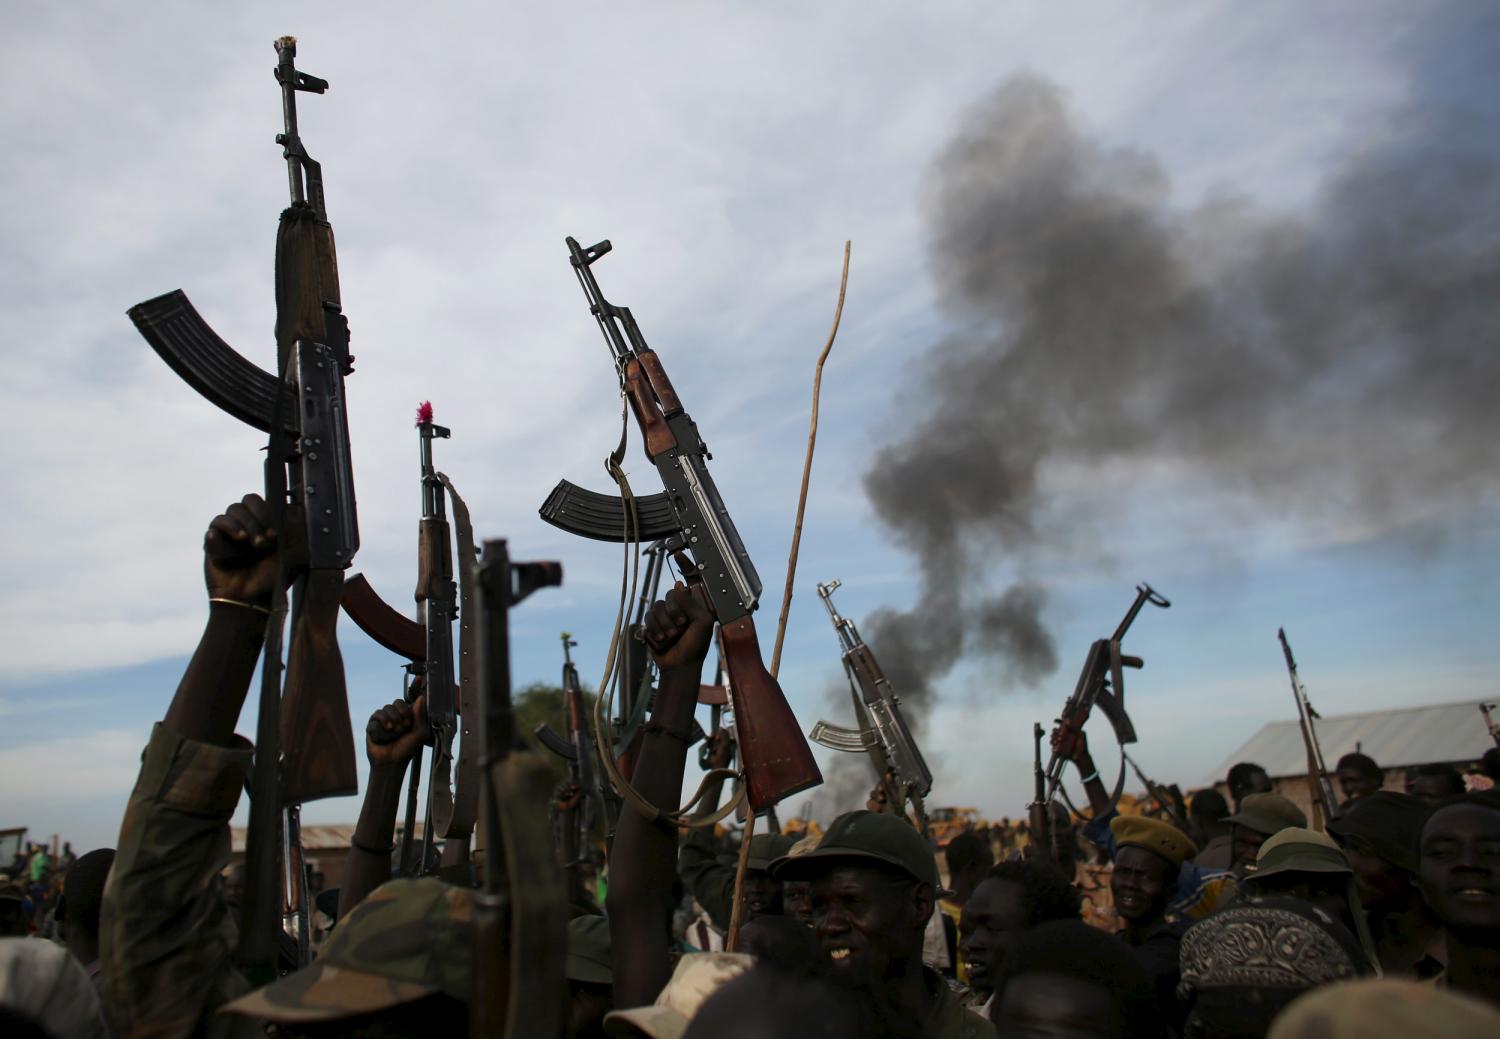 Rebel fighters hold up their rifles as they walk in front of a bushfire in a rebel-controlled territory in Upper Nile State, South Sudan February 13, 2014. South Sudan's rebels said on Tuesday that government soldiers had launched attacks against their positions in oil-rich Unity State in what they said was a violation of a peace deal signed in August. Picture taken February 13, 2014. REUTERS/Goran Tomasevic TPX IMAGES OF THE DAY - RTS7JEQ